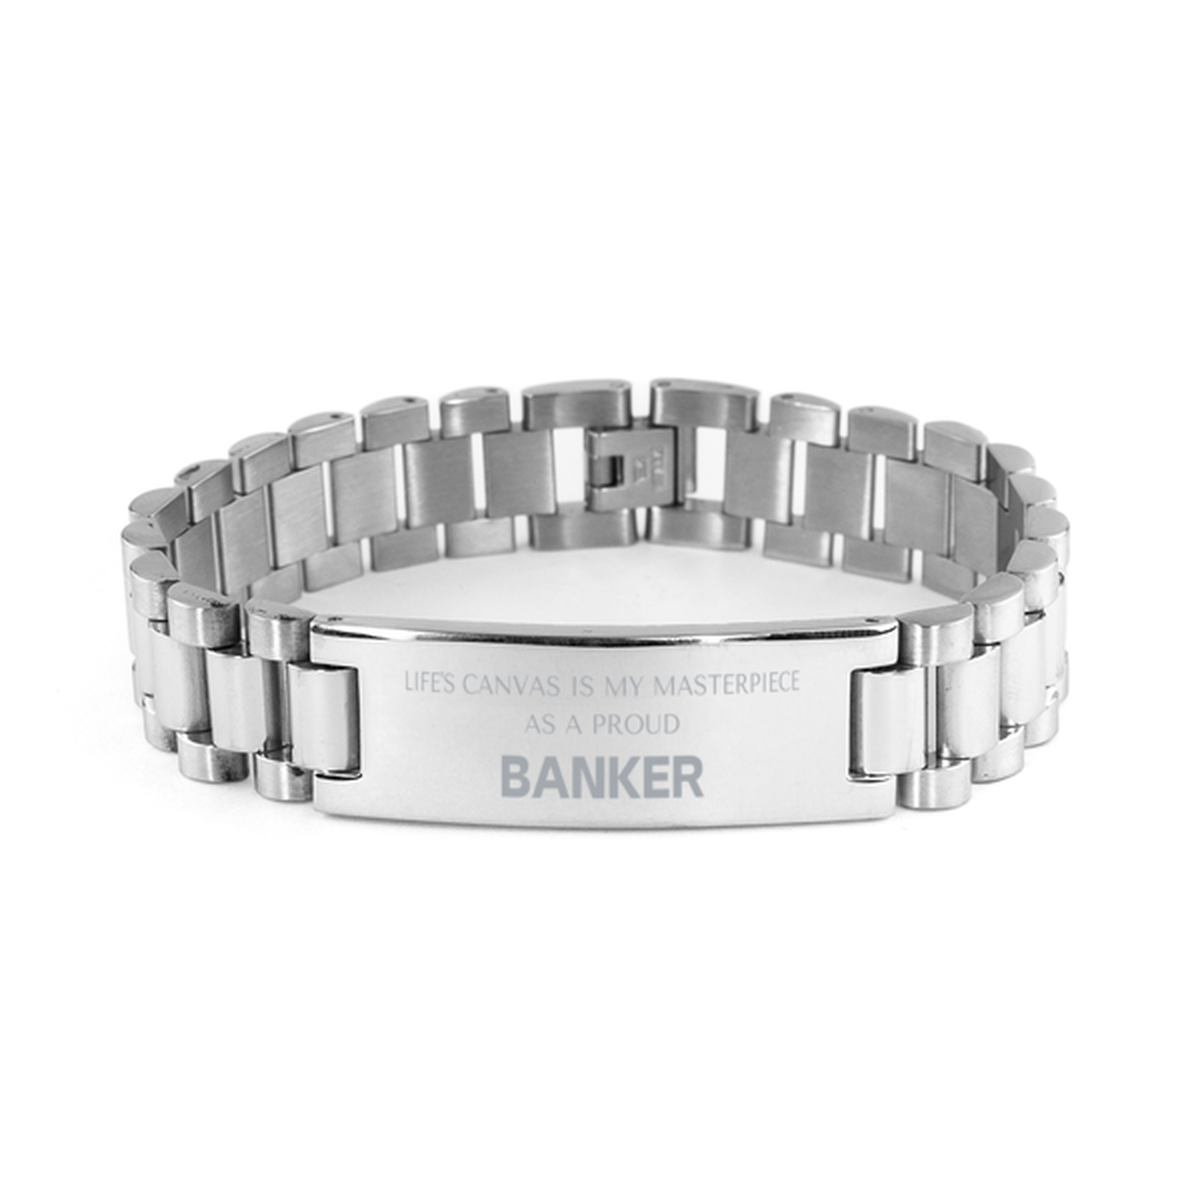 Proud Banker Gifts, Life's canvas is my masterpiece, Epic Birthday Christmas Unique Ladder Stainless Steel Bracelet For Banker, Coworkers, Men, Women, Friends